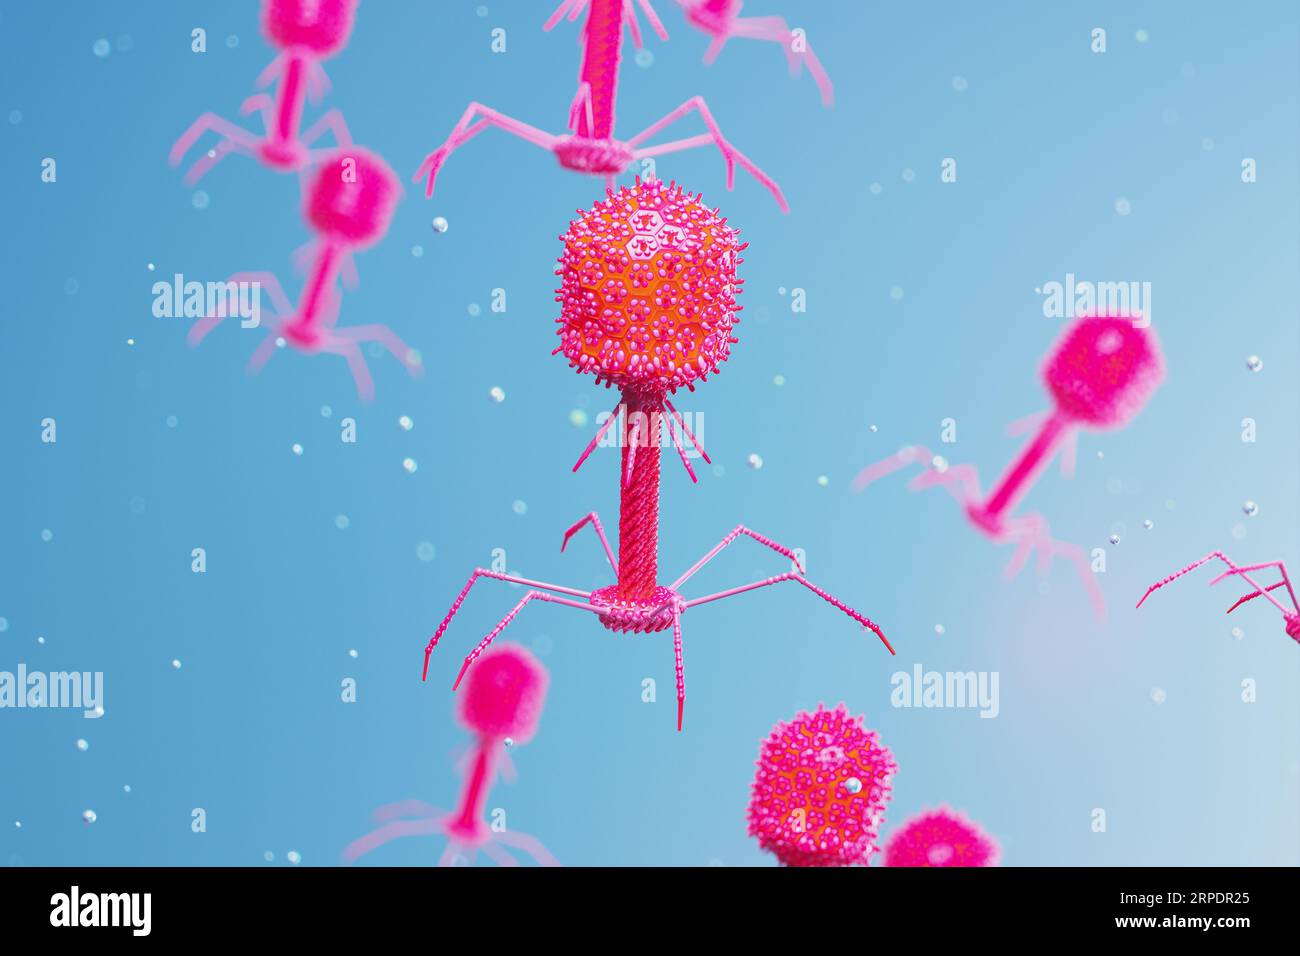 Many bacteriophages or phages floating and slowly moving in the organism. Stock Photo